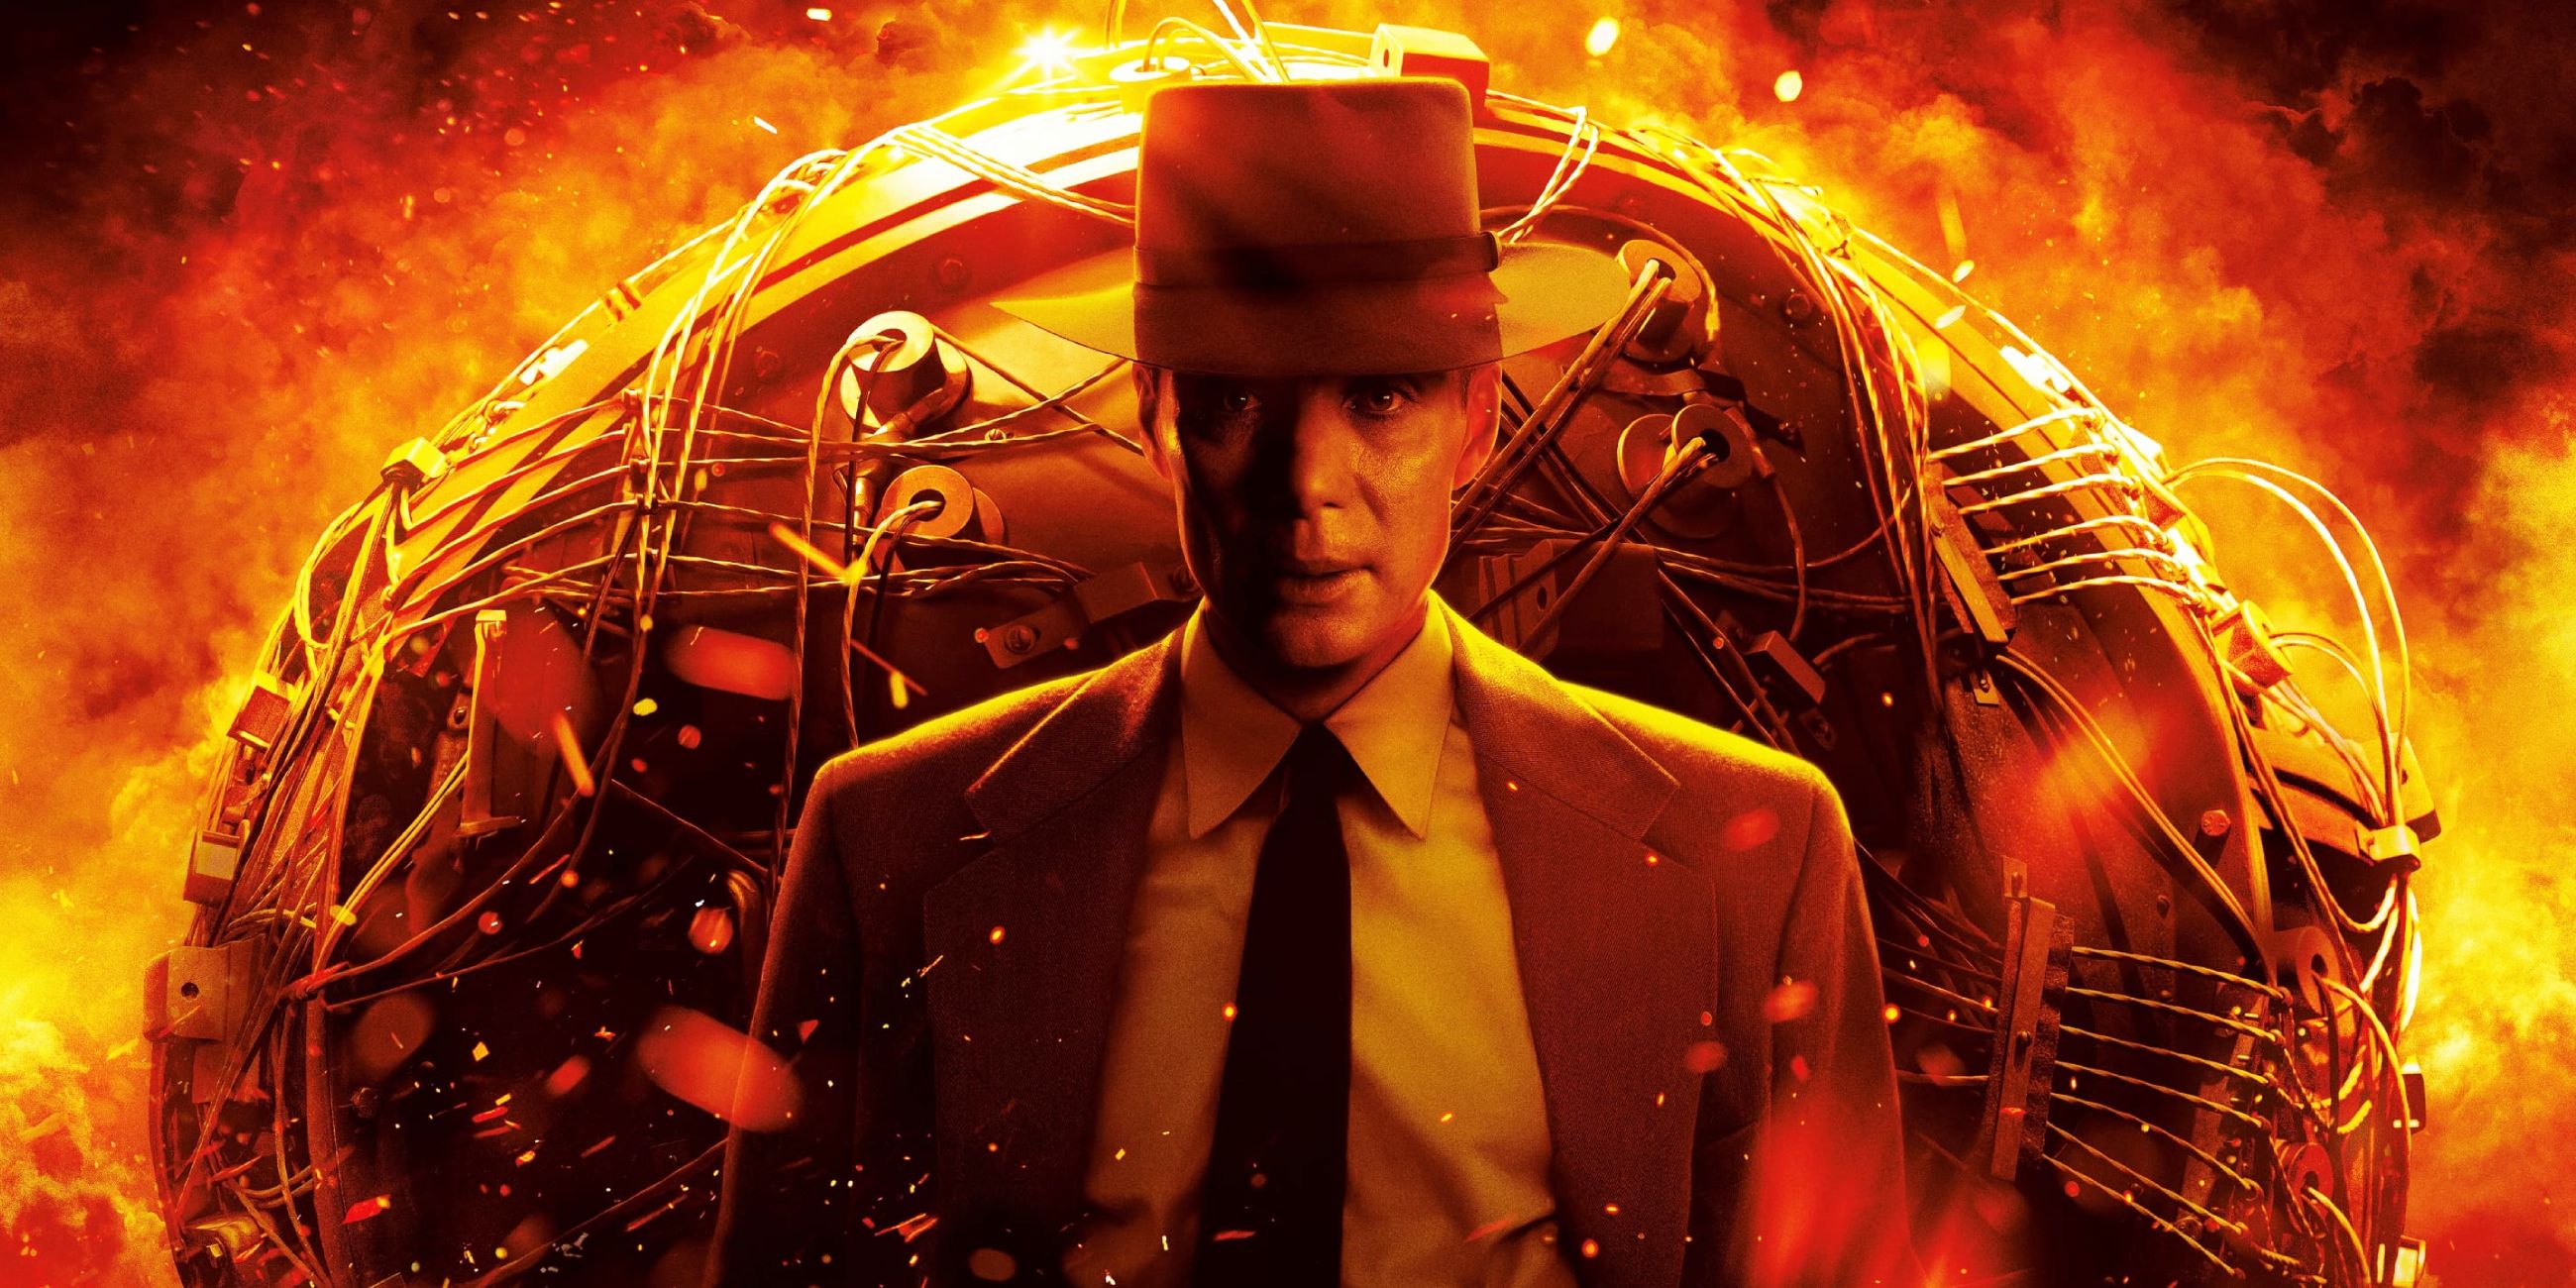 Cillian Murphy standing in front of a bomb in a poster for Oppenheimer